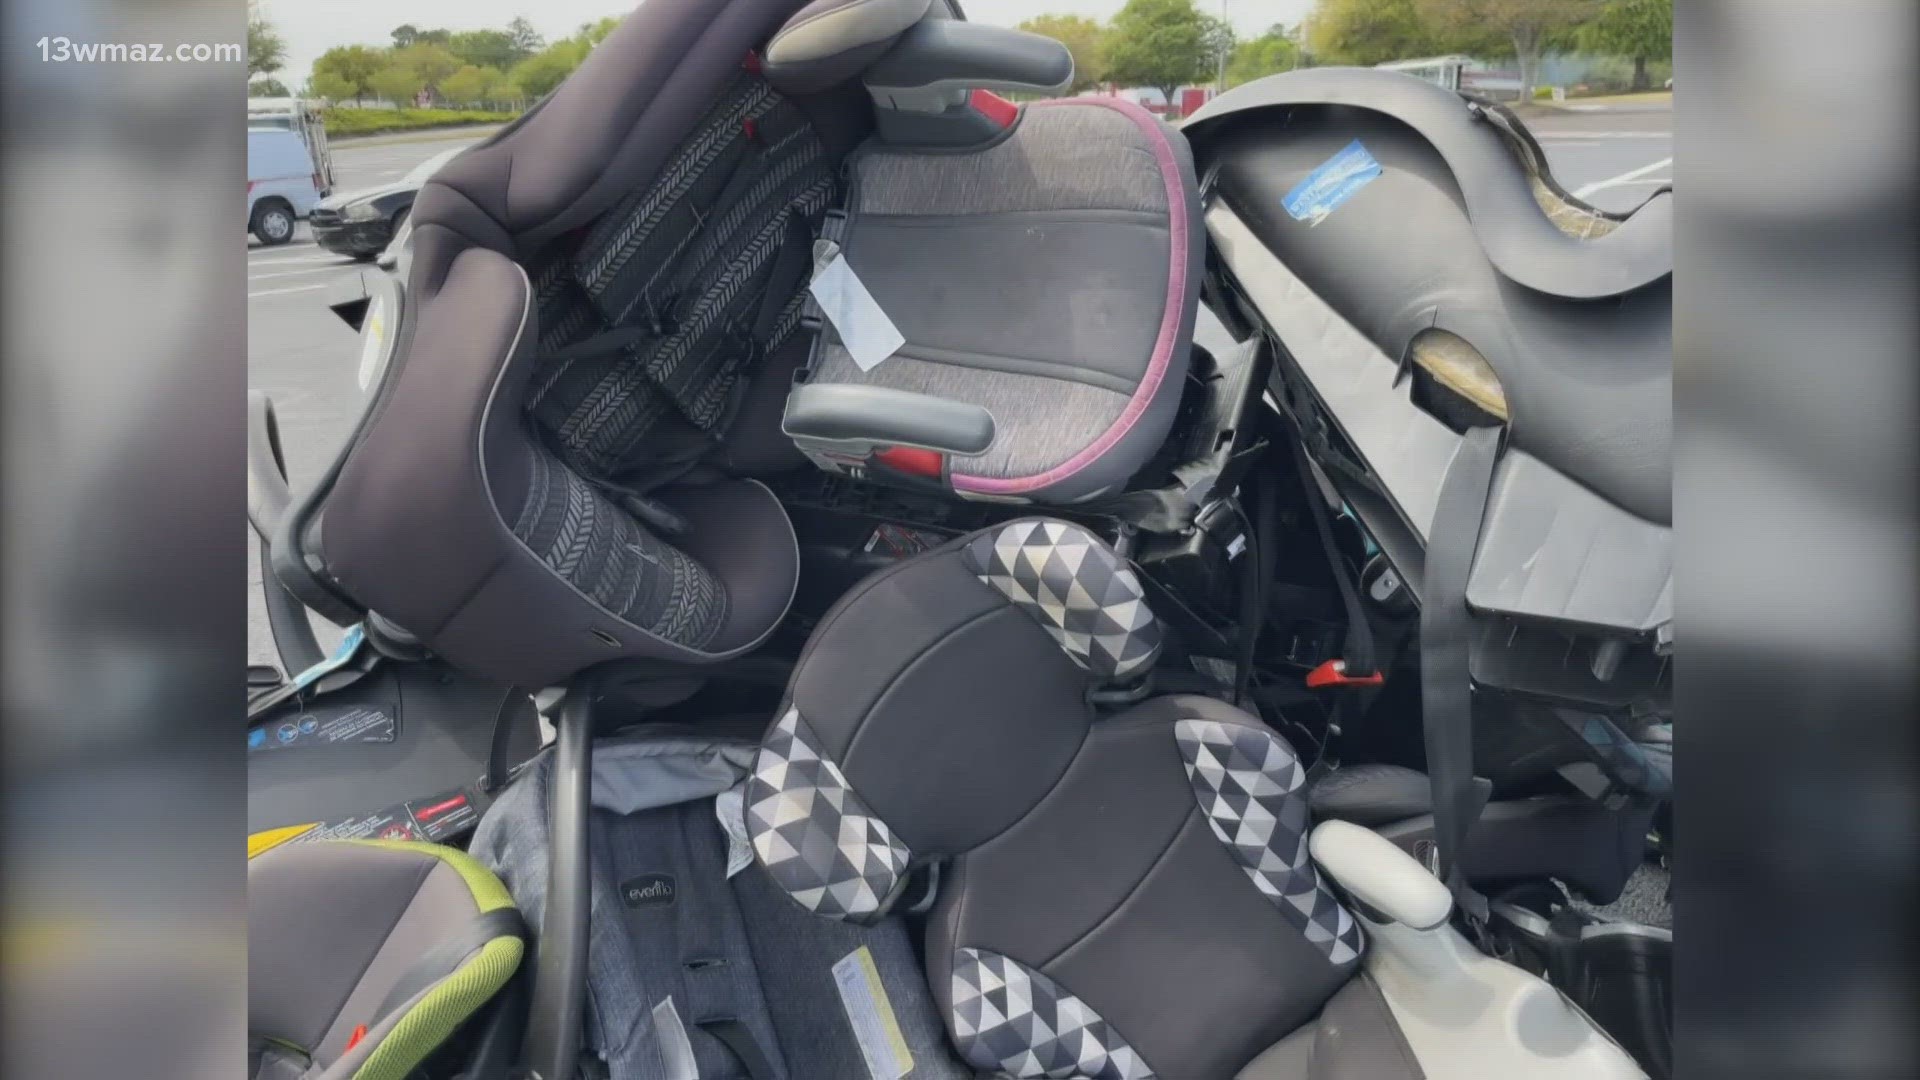 They also replaced worn, expired, and damaged car seats while supplies lasted.